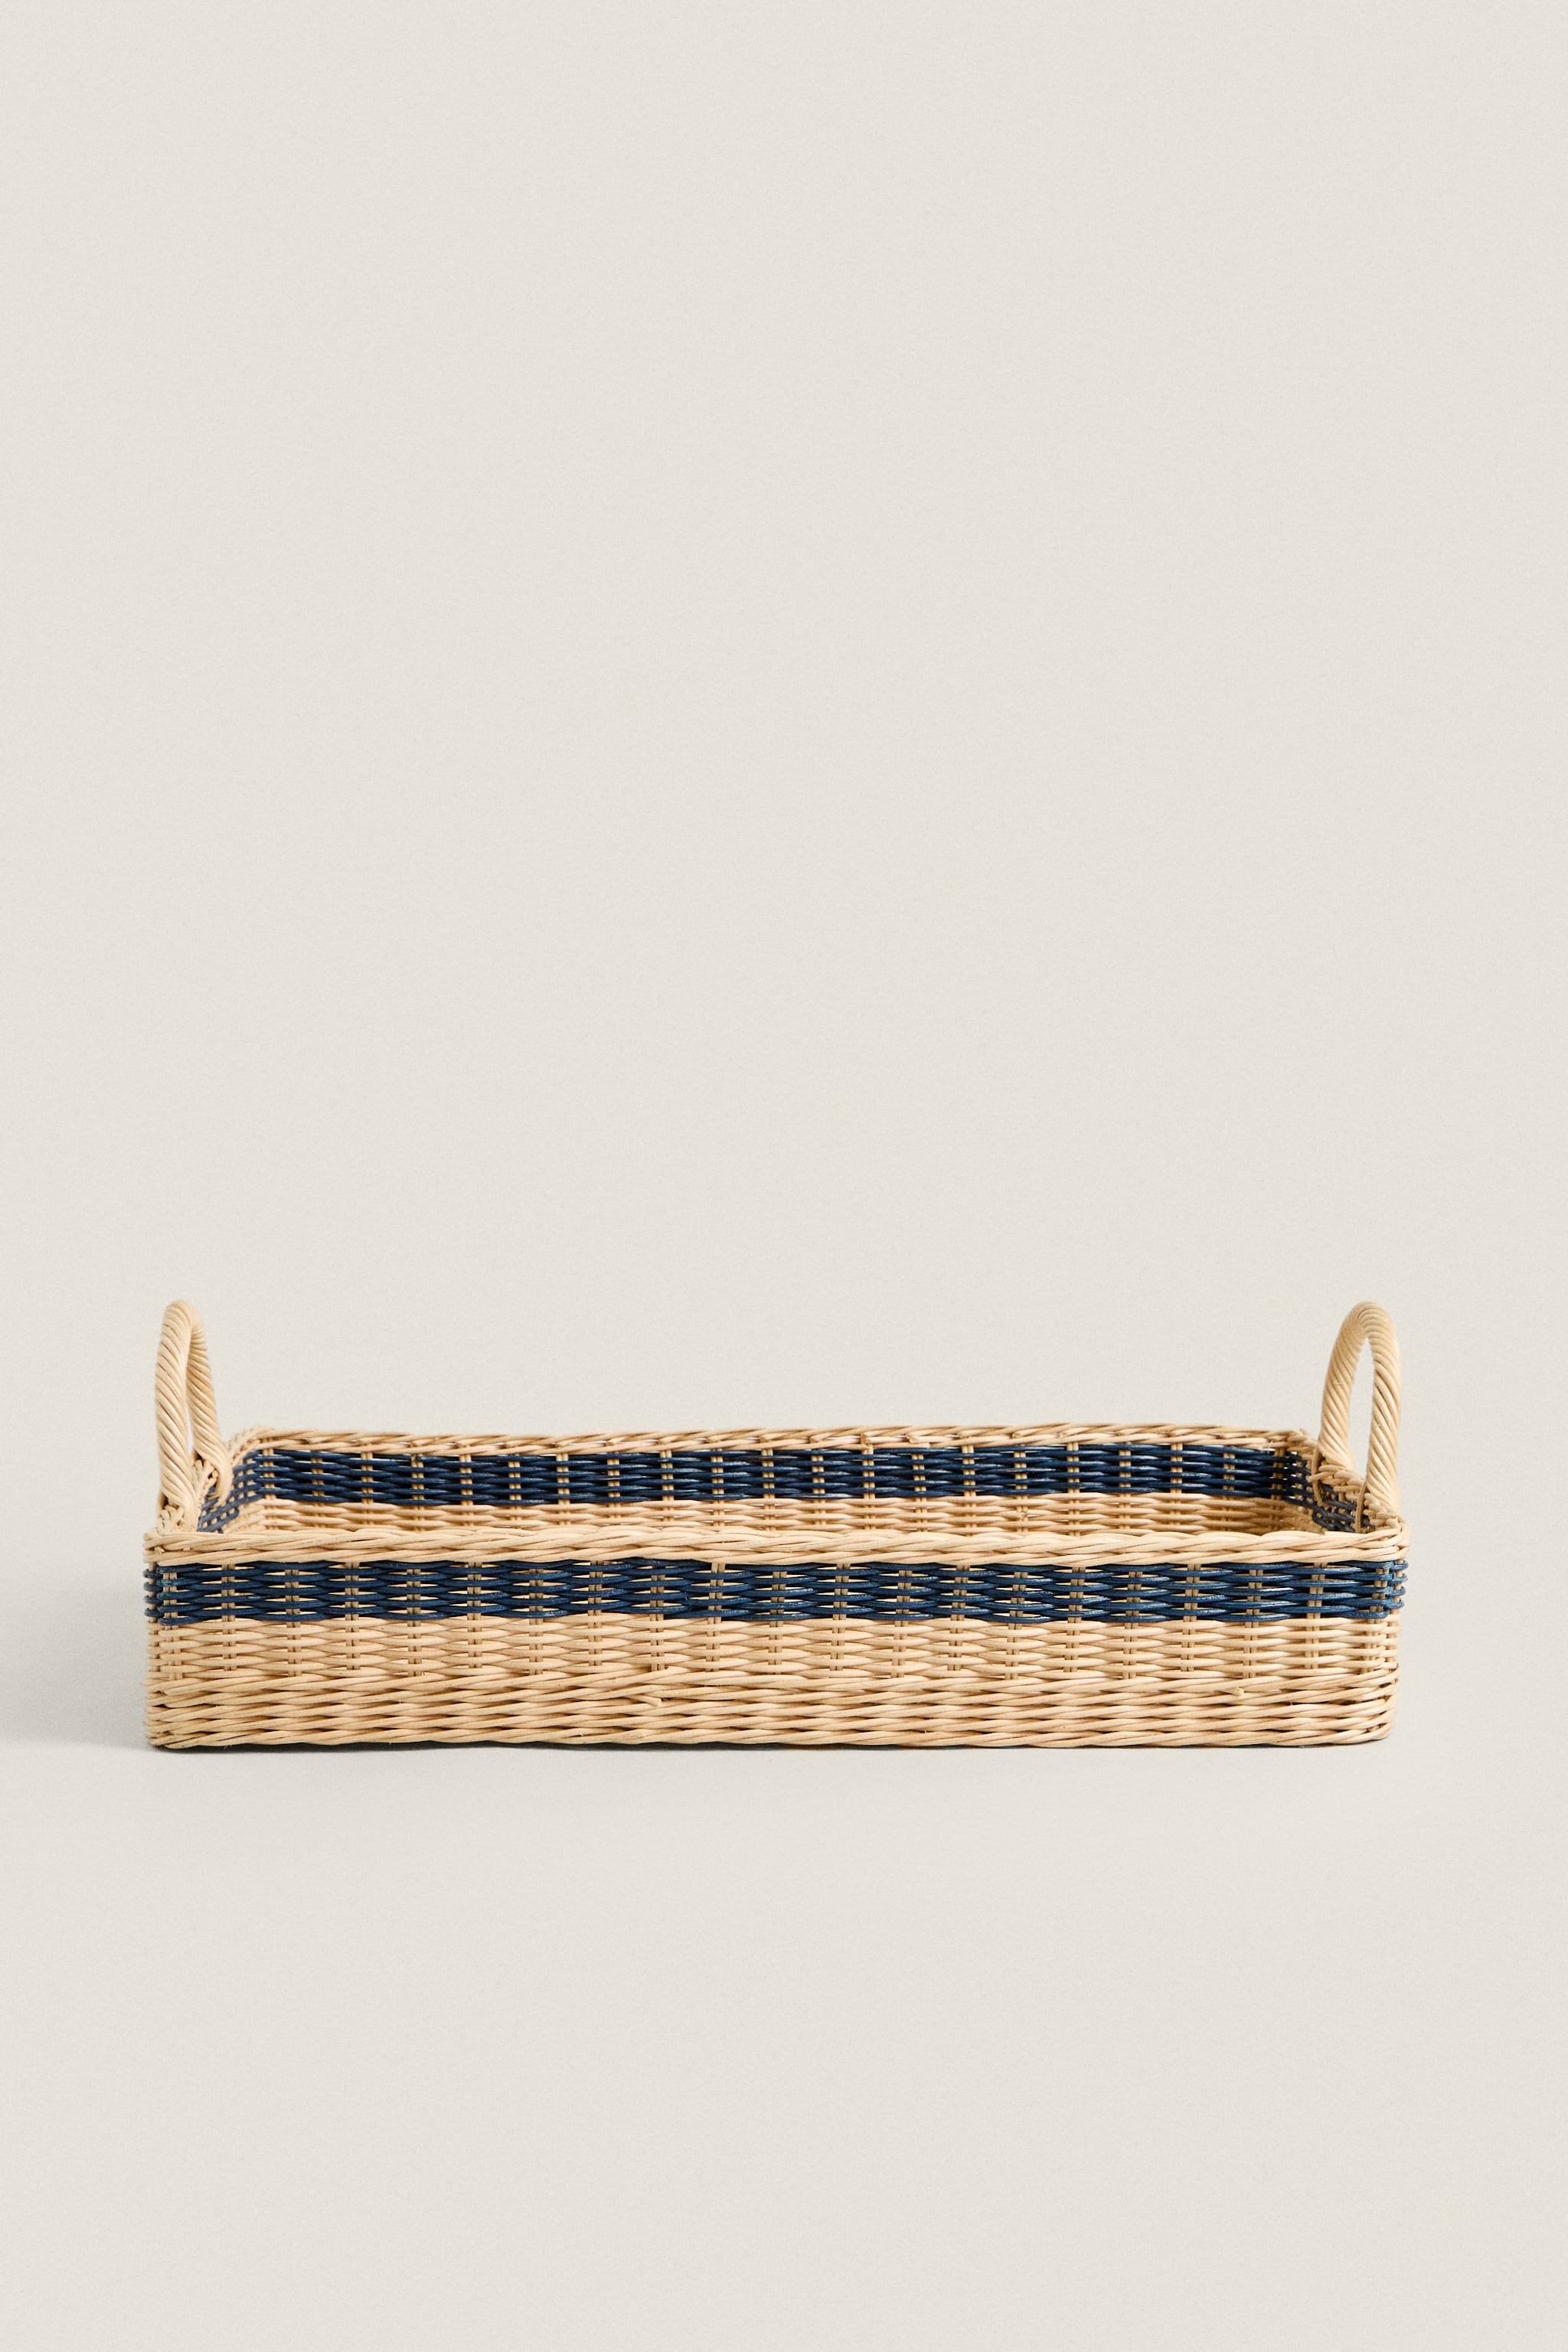 RATTAN TRAY WITH A COLORED STRIPE